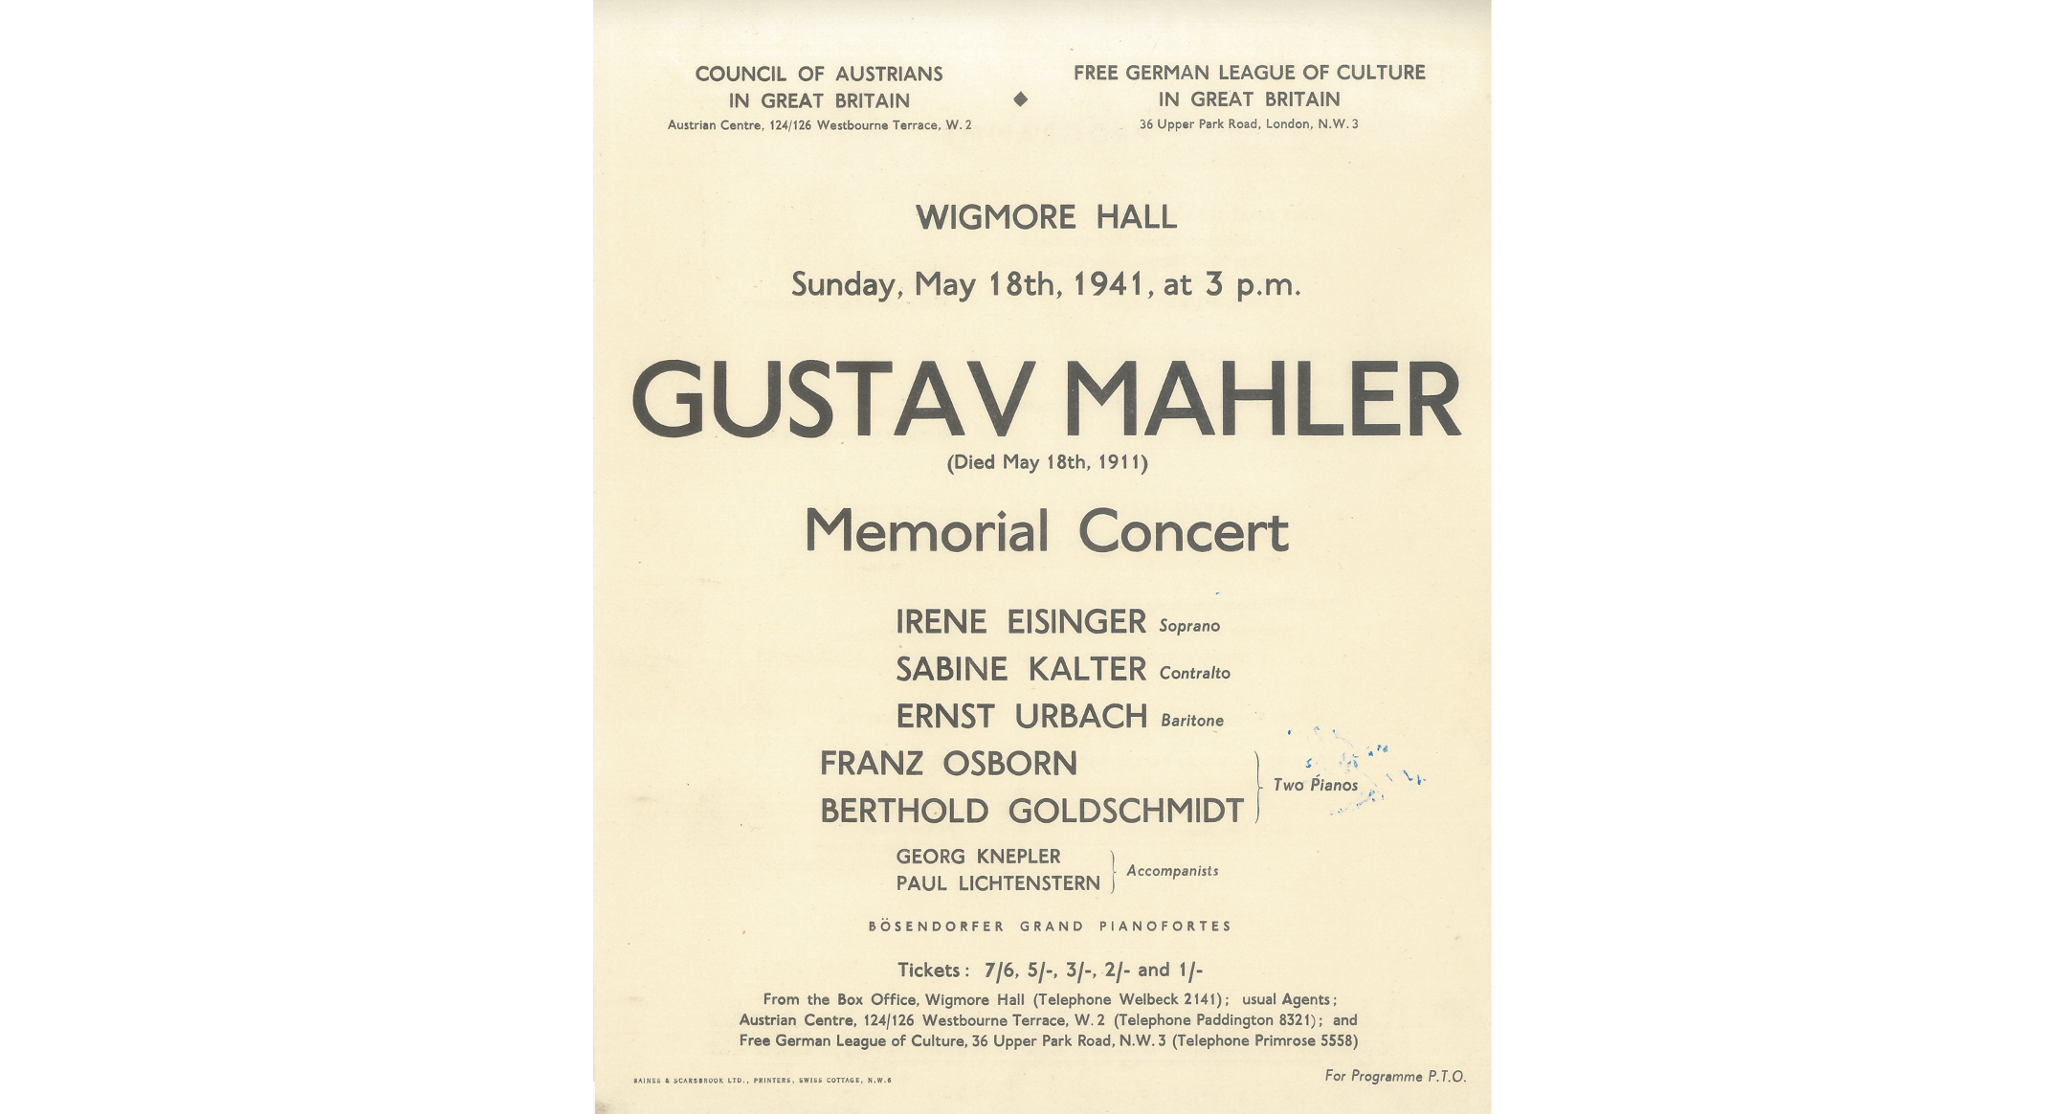 A concert programme of a memorial concert for Gustav Mahler held at Wigmore Hall on Sunday, May 18, 1941. The programme has the names of the performers, ticket prices, the address and the telephone.